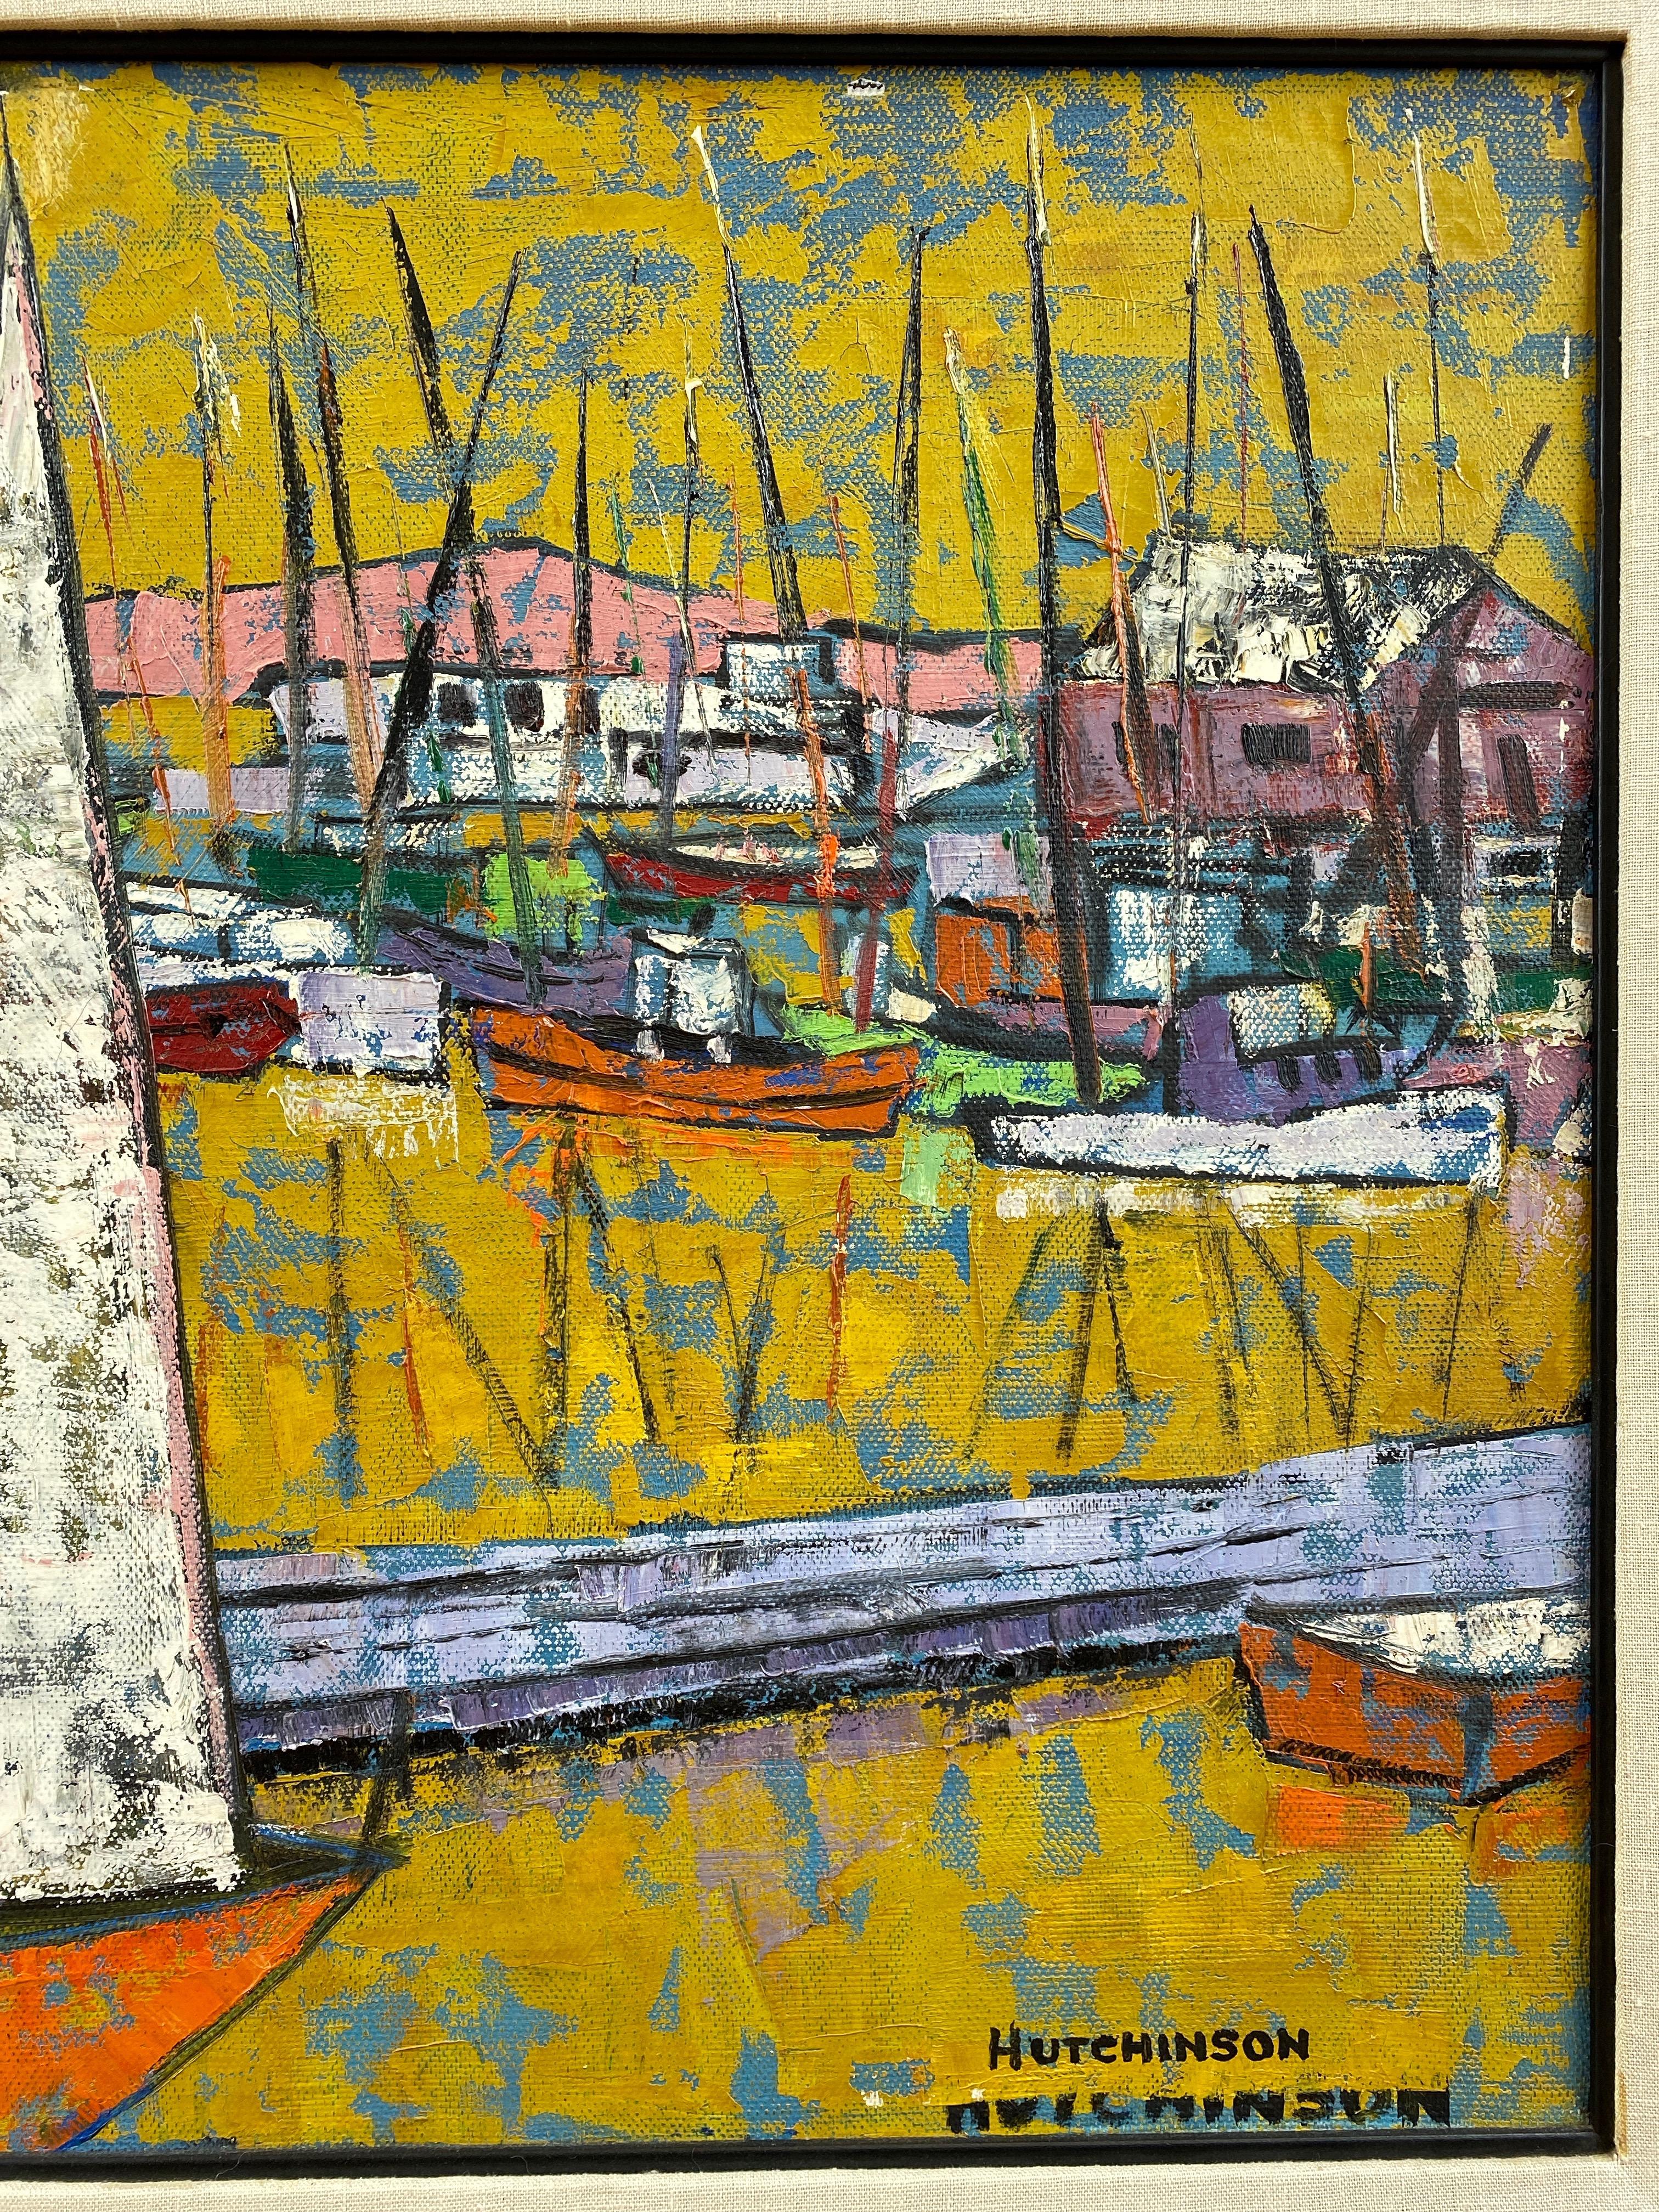 Hutchinson “Boats in Harbor”, Expressionist Acrylic Painting, 1950s 1